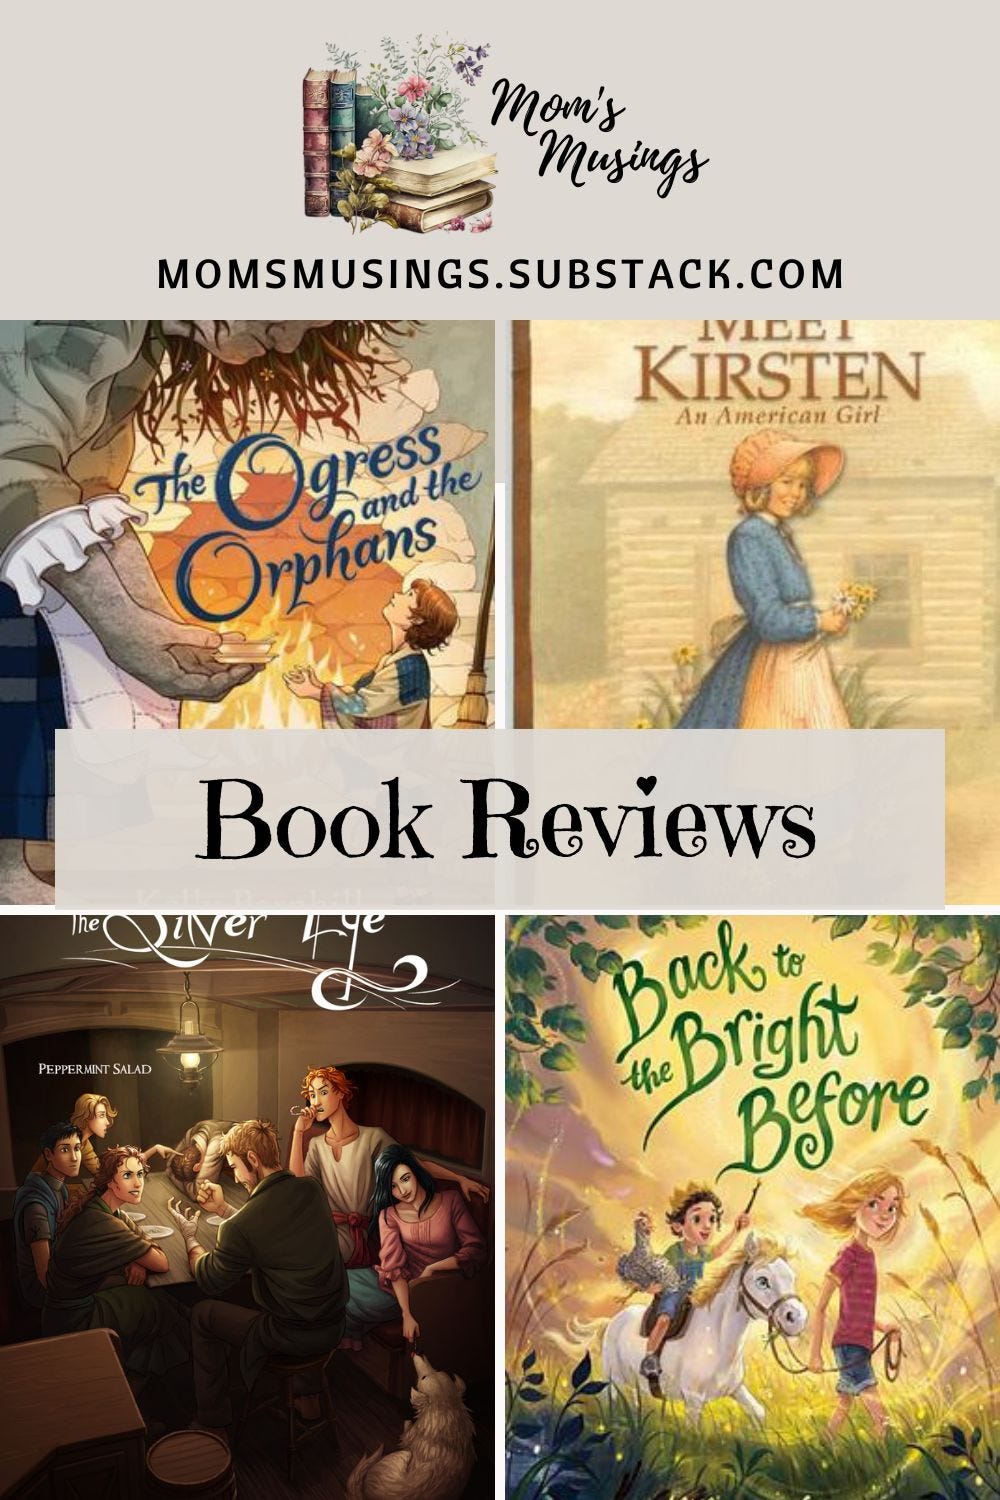 pinnable image of book reviews of the ogress and the orphans, meet kirsten, the silver eye, and back to the bright before